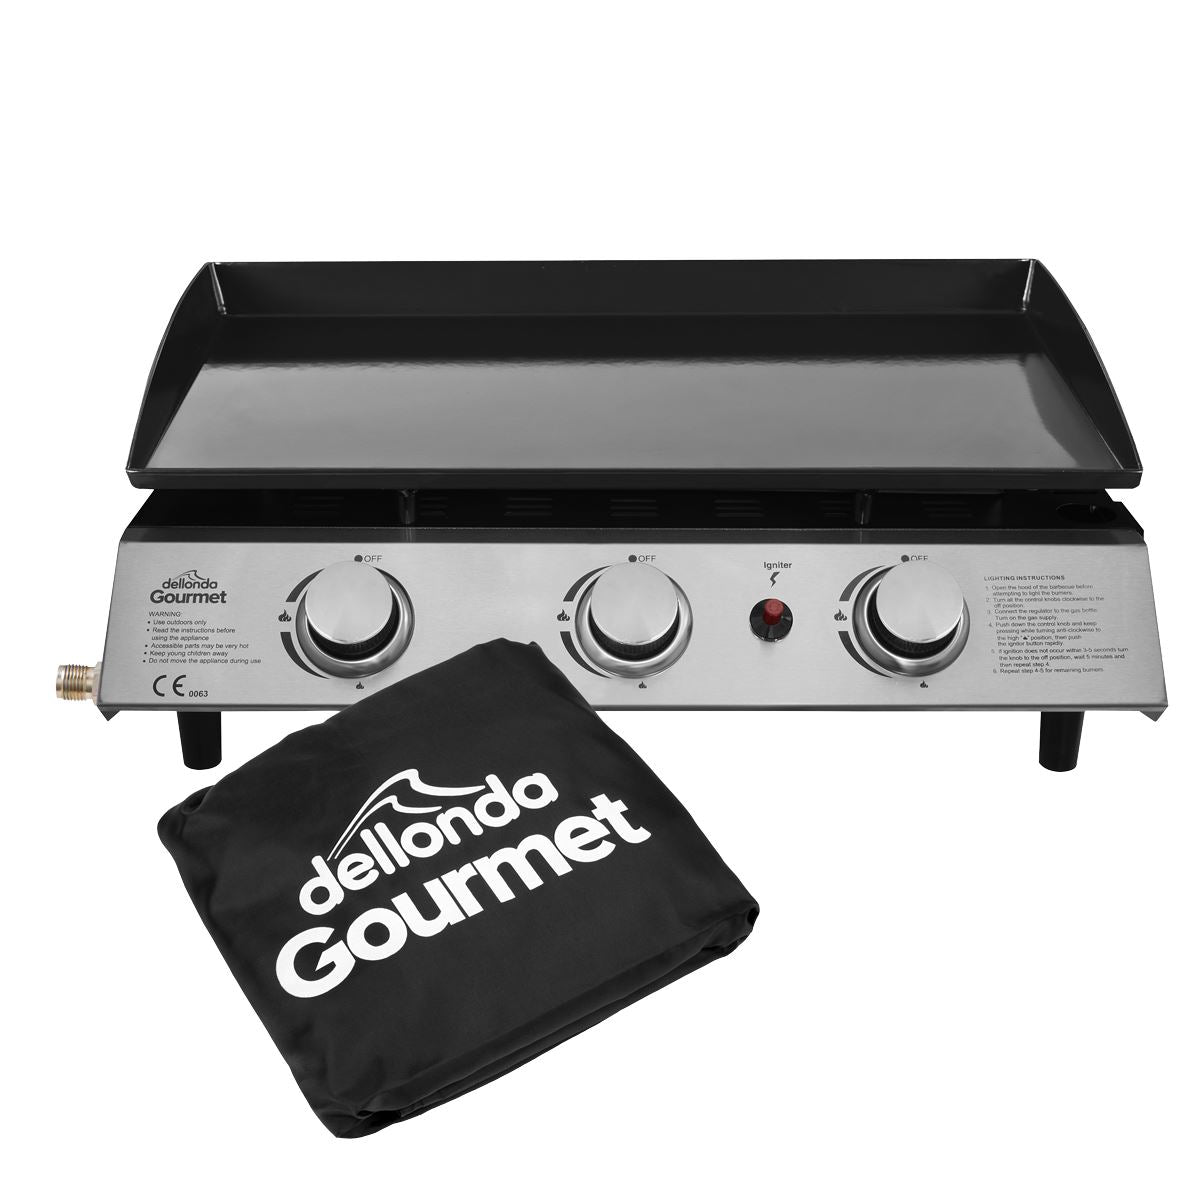 Dellonda 3 Burner Portable Gas Plancha 7.5kW BBQ Griddle, Supplied with PVC Cover, Stainless Steel